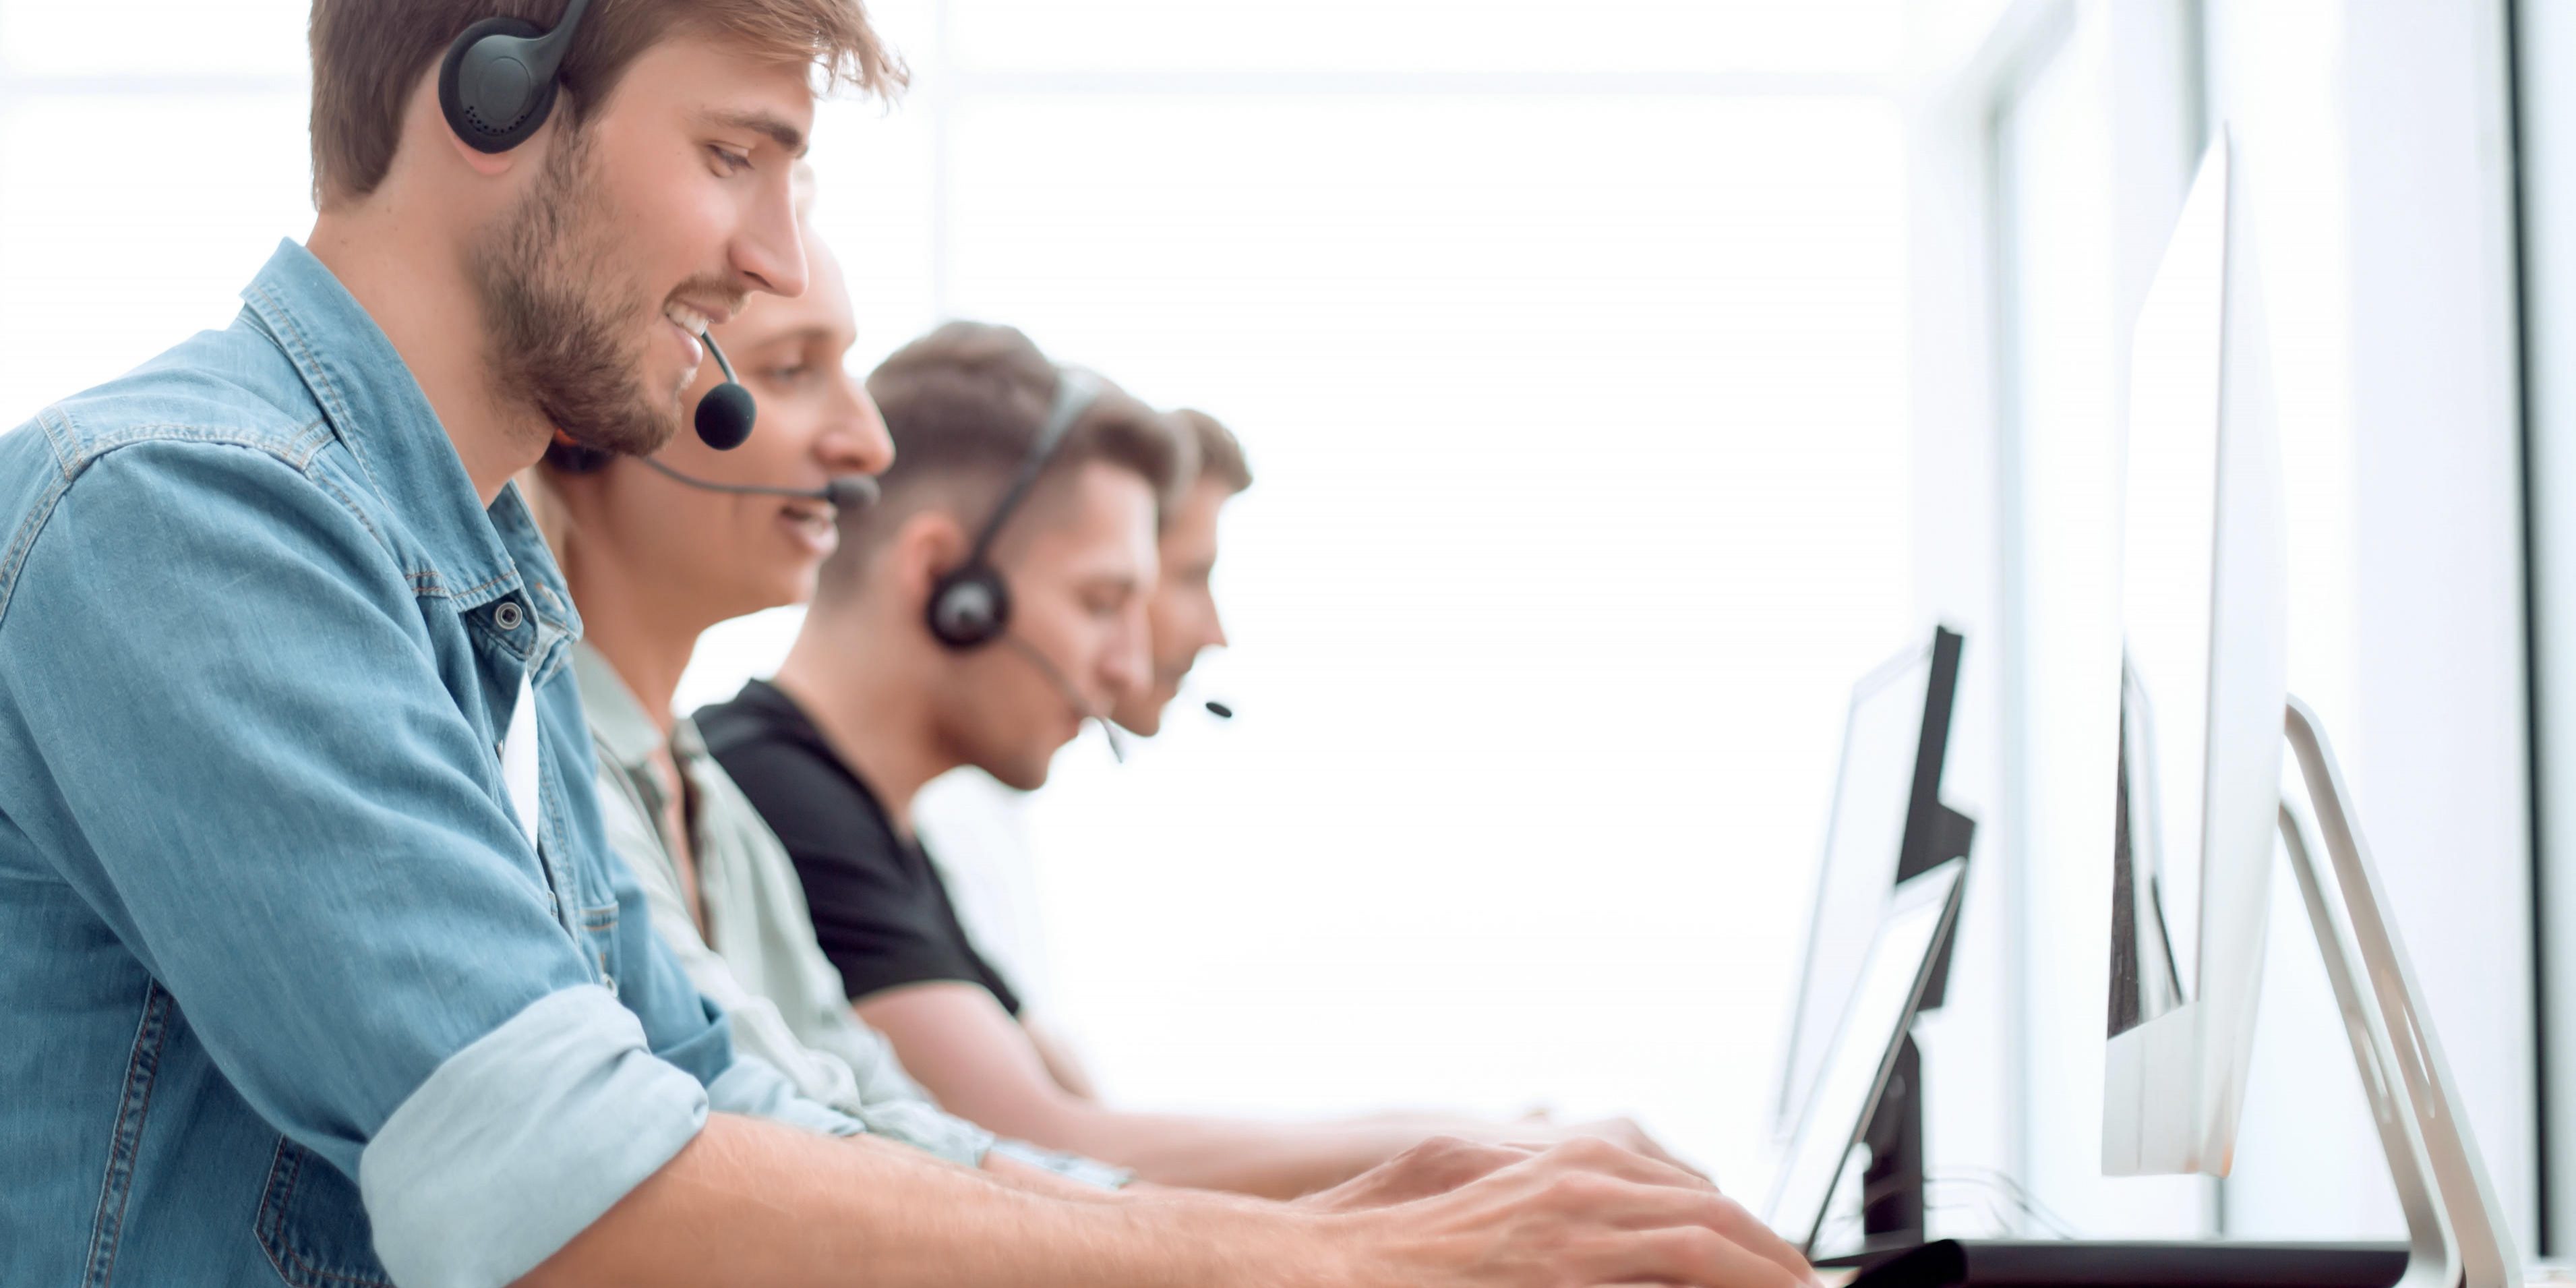 2A9M29D call center consultants use computers to work with clients